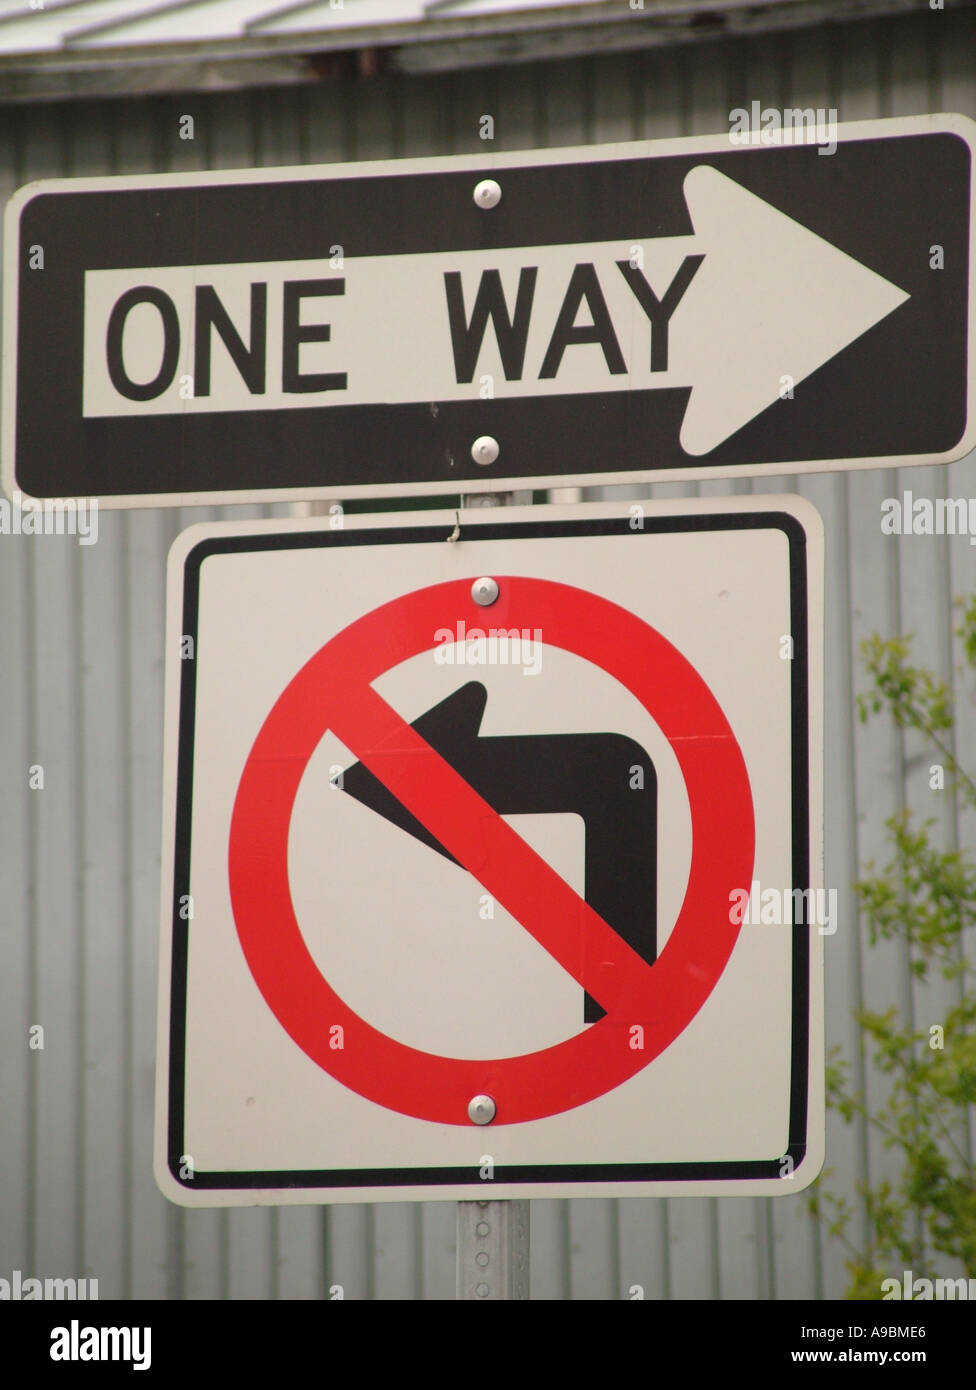 AJD42633, road signs, One Way, no left turn sign Stock Photo